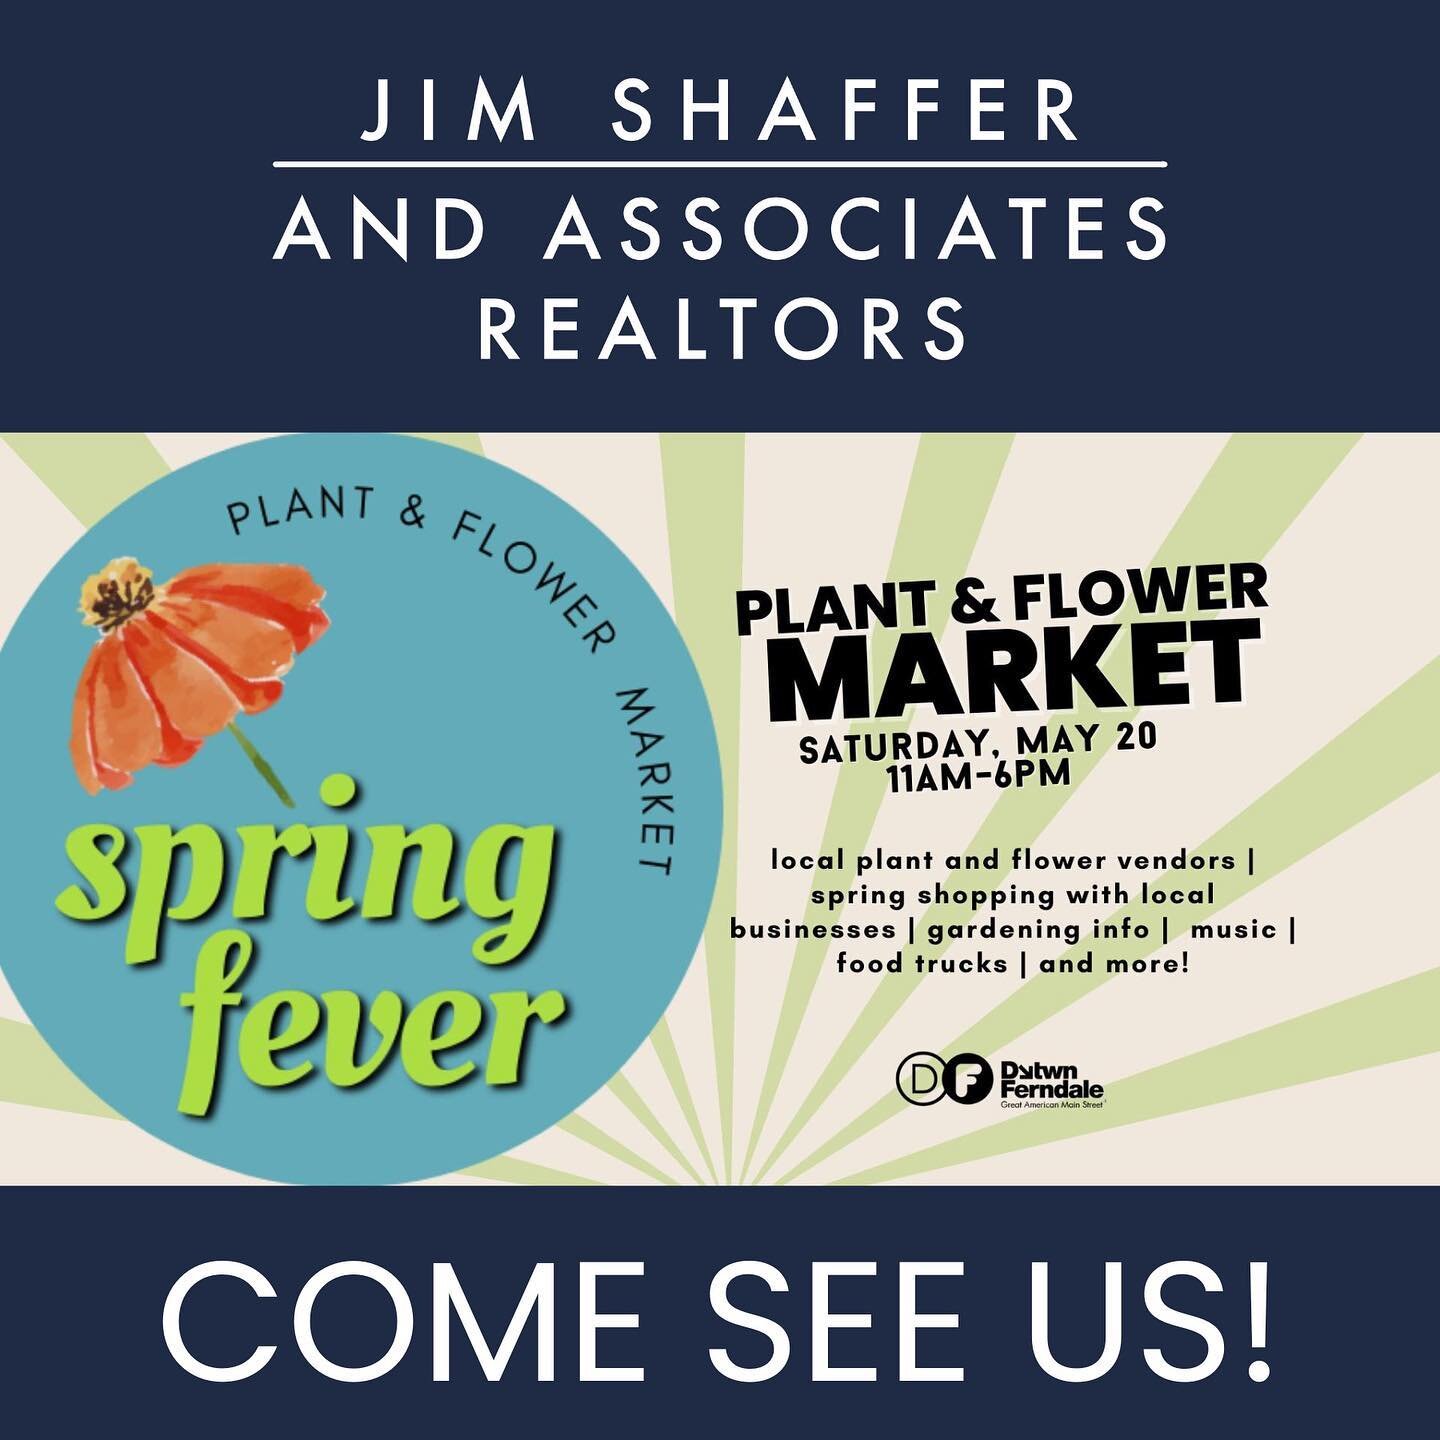 🌸🌿 Spring is in full bloom in Downtown Ferndale! 🌺🌼
⠀
Join JSA at the Spring Fever Plant &amp; Flower Sale on West Troy Street (221 W. Troy Ferndale, MI 48220) tomorrow, Saturday, May 20, from 11 am to 6 pm.
⠀
📸 We'll have our adorable photo boo